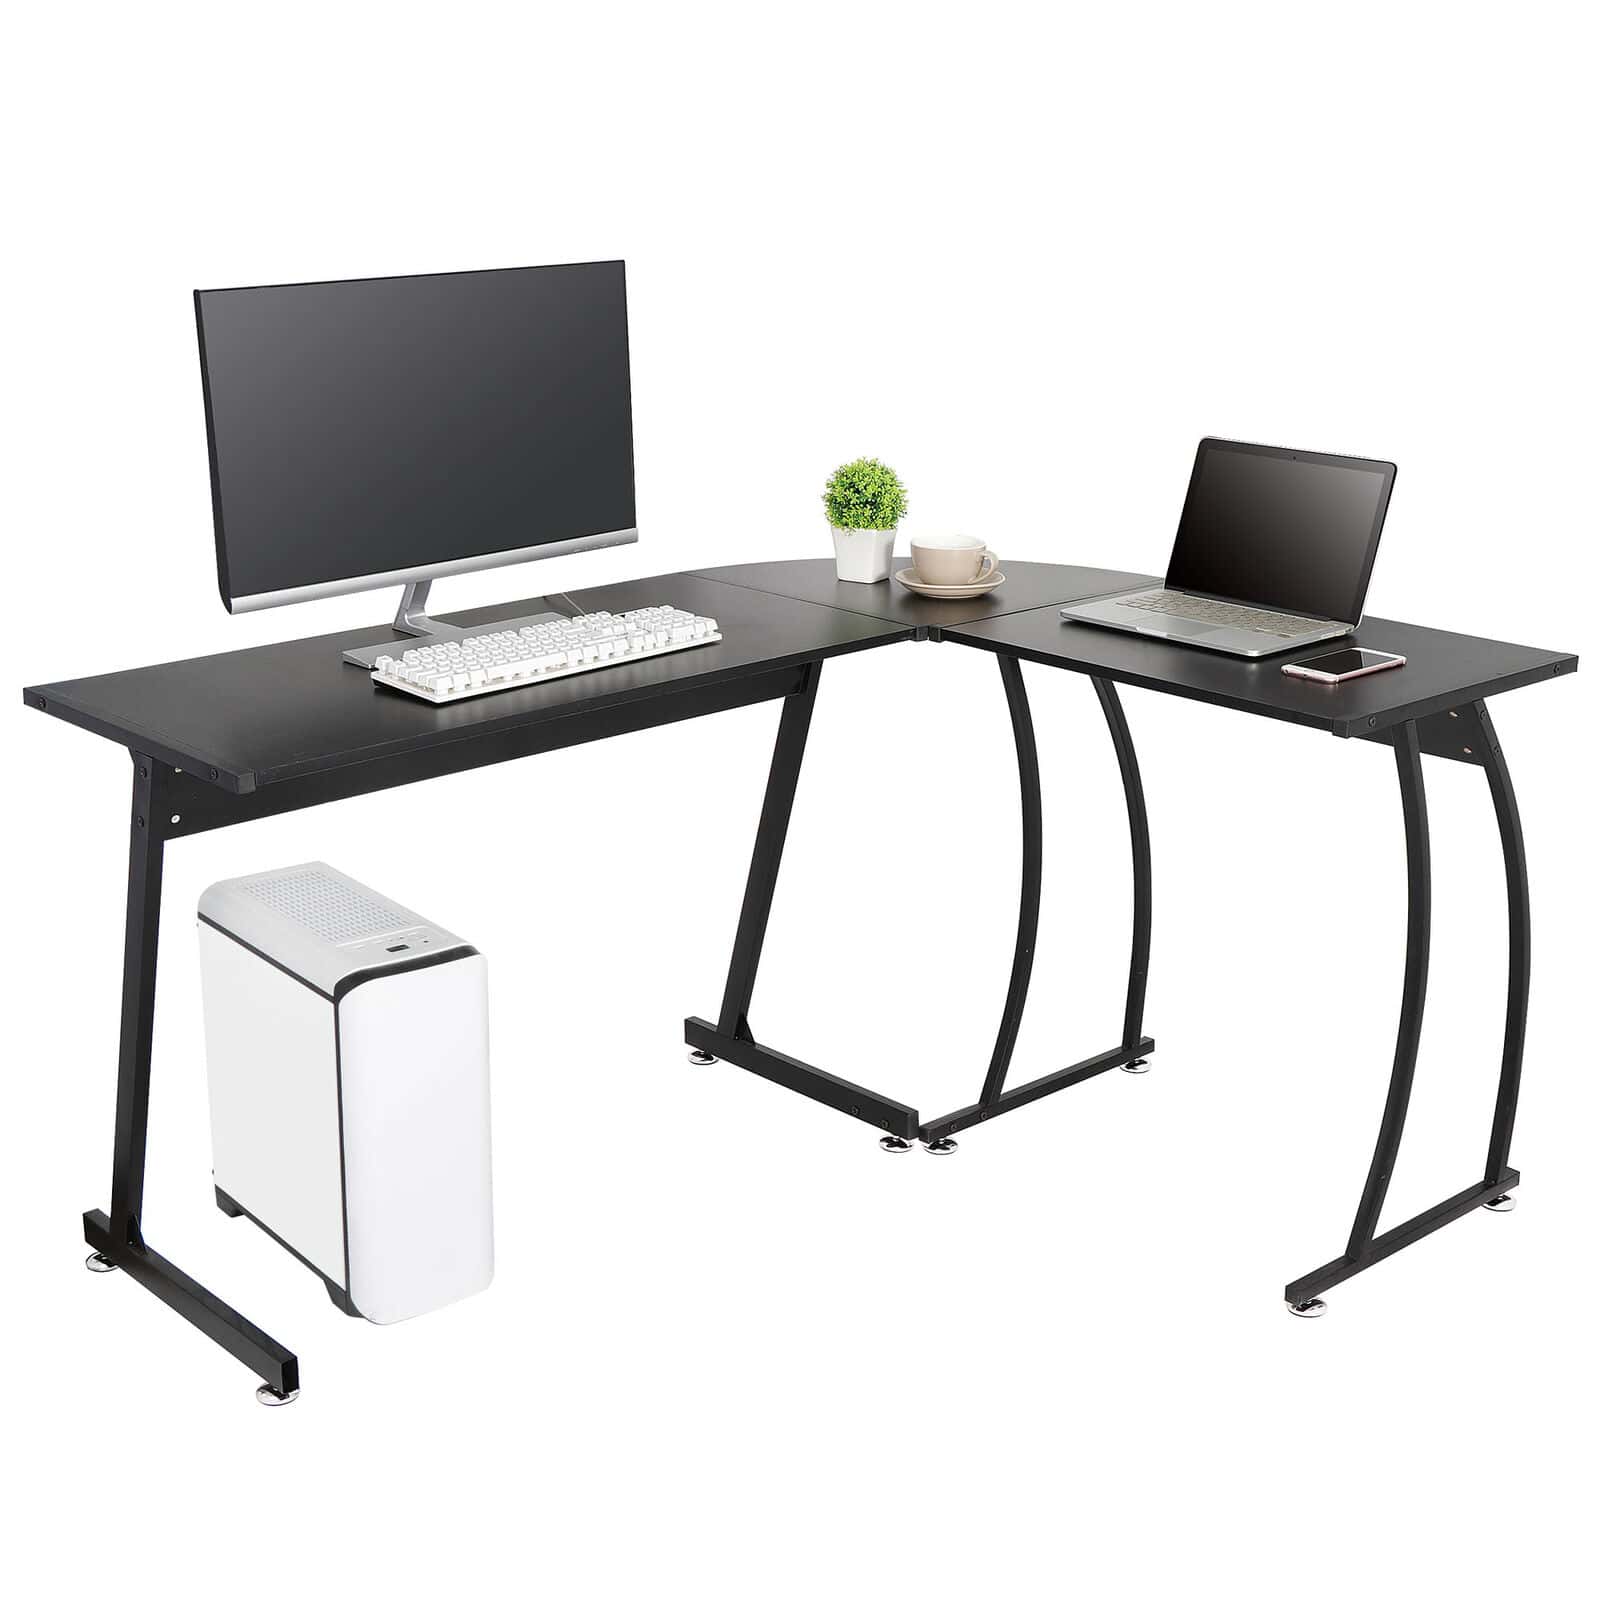 58″ Computer Gaming Laptop Table L Shaped Desk Workstation Home Office Desk with a desktop monitor, laptop, keyboard, mouse, small potted plant, phone, and a white CPU, placed on a white background.